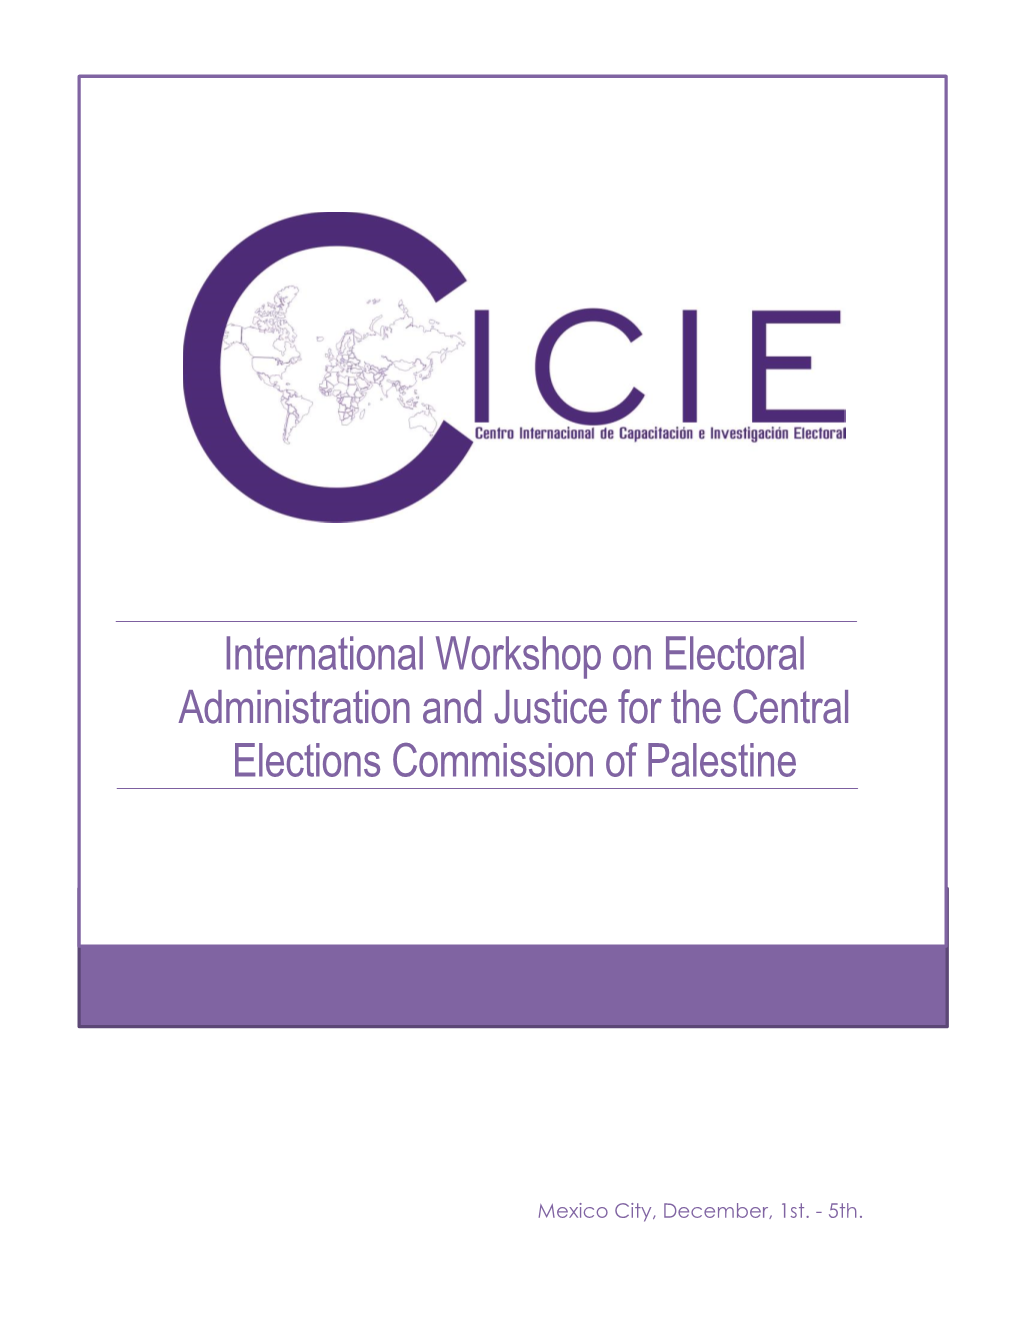 International Workshop on Electoral Administration and Justice for the Central Elections Commission of Palestine